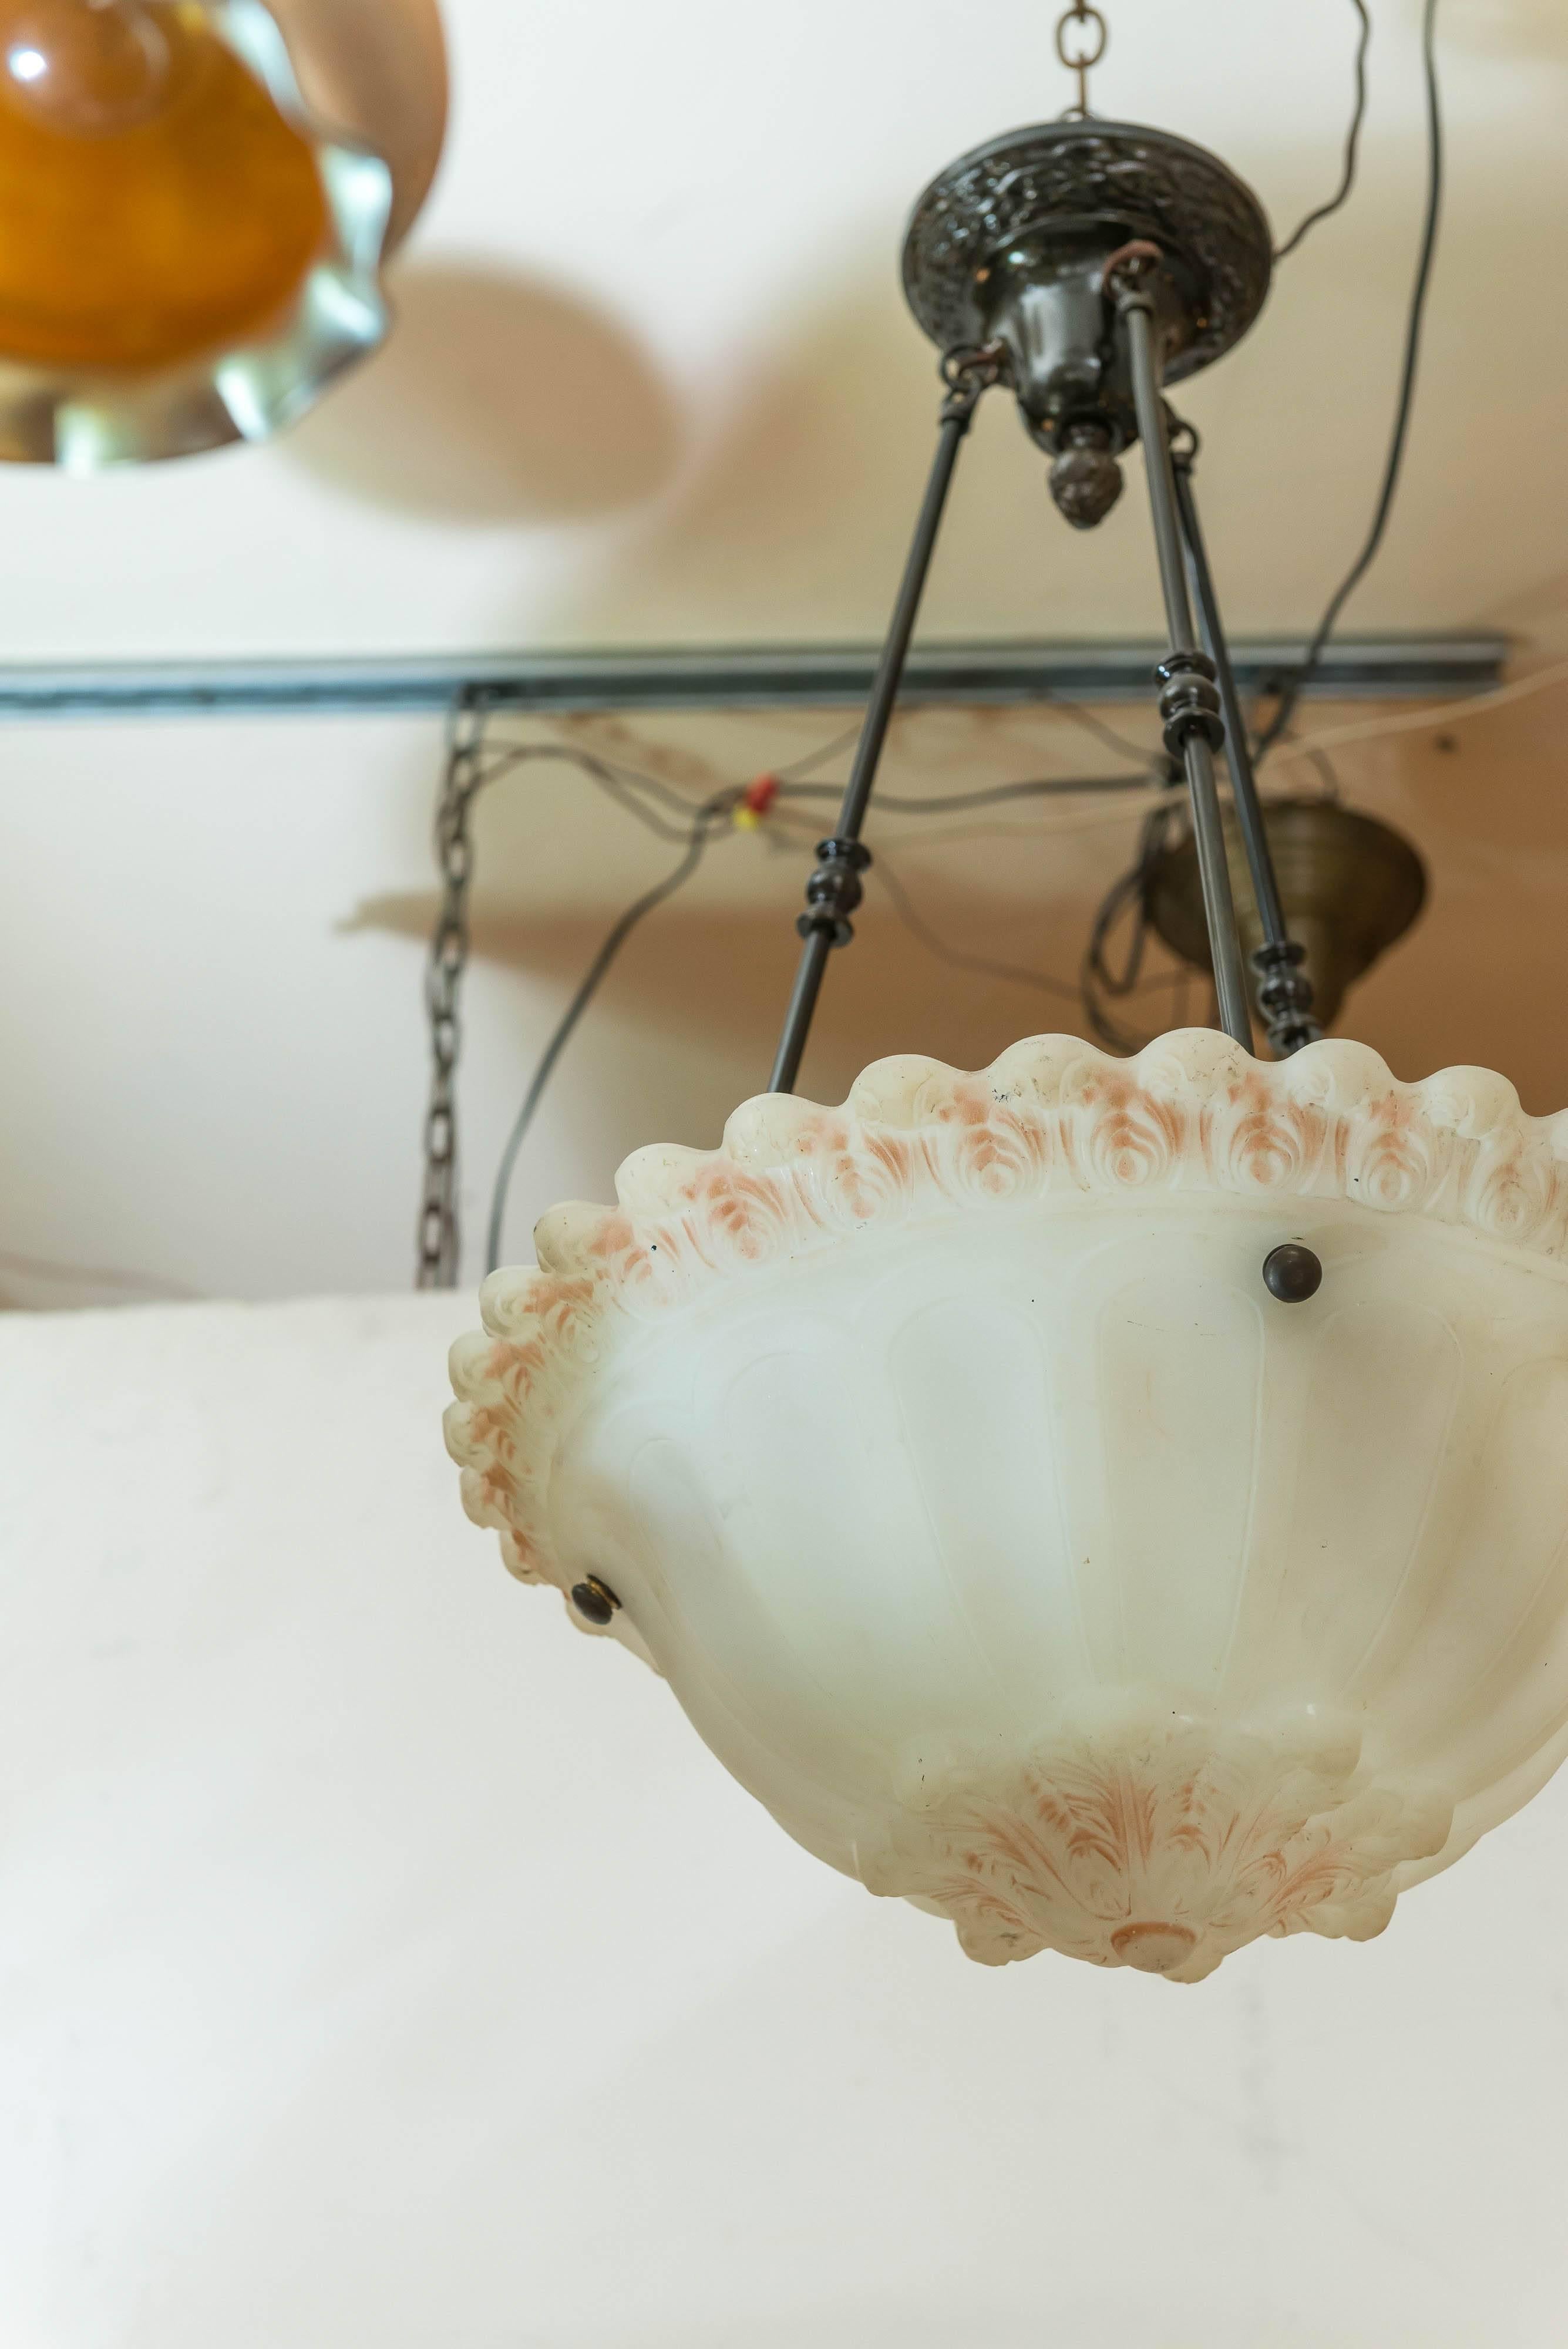 This American pendant has the unusual feature of having a scalloped border. It also much of the original factory painted highlighting. A very warm and inviting piece of antique lighting good for any room in your home. Newly wired, and ready for use.